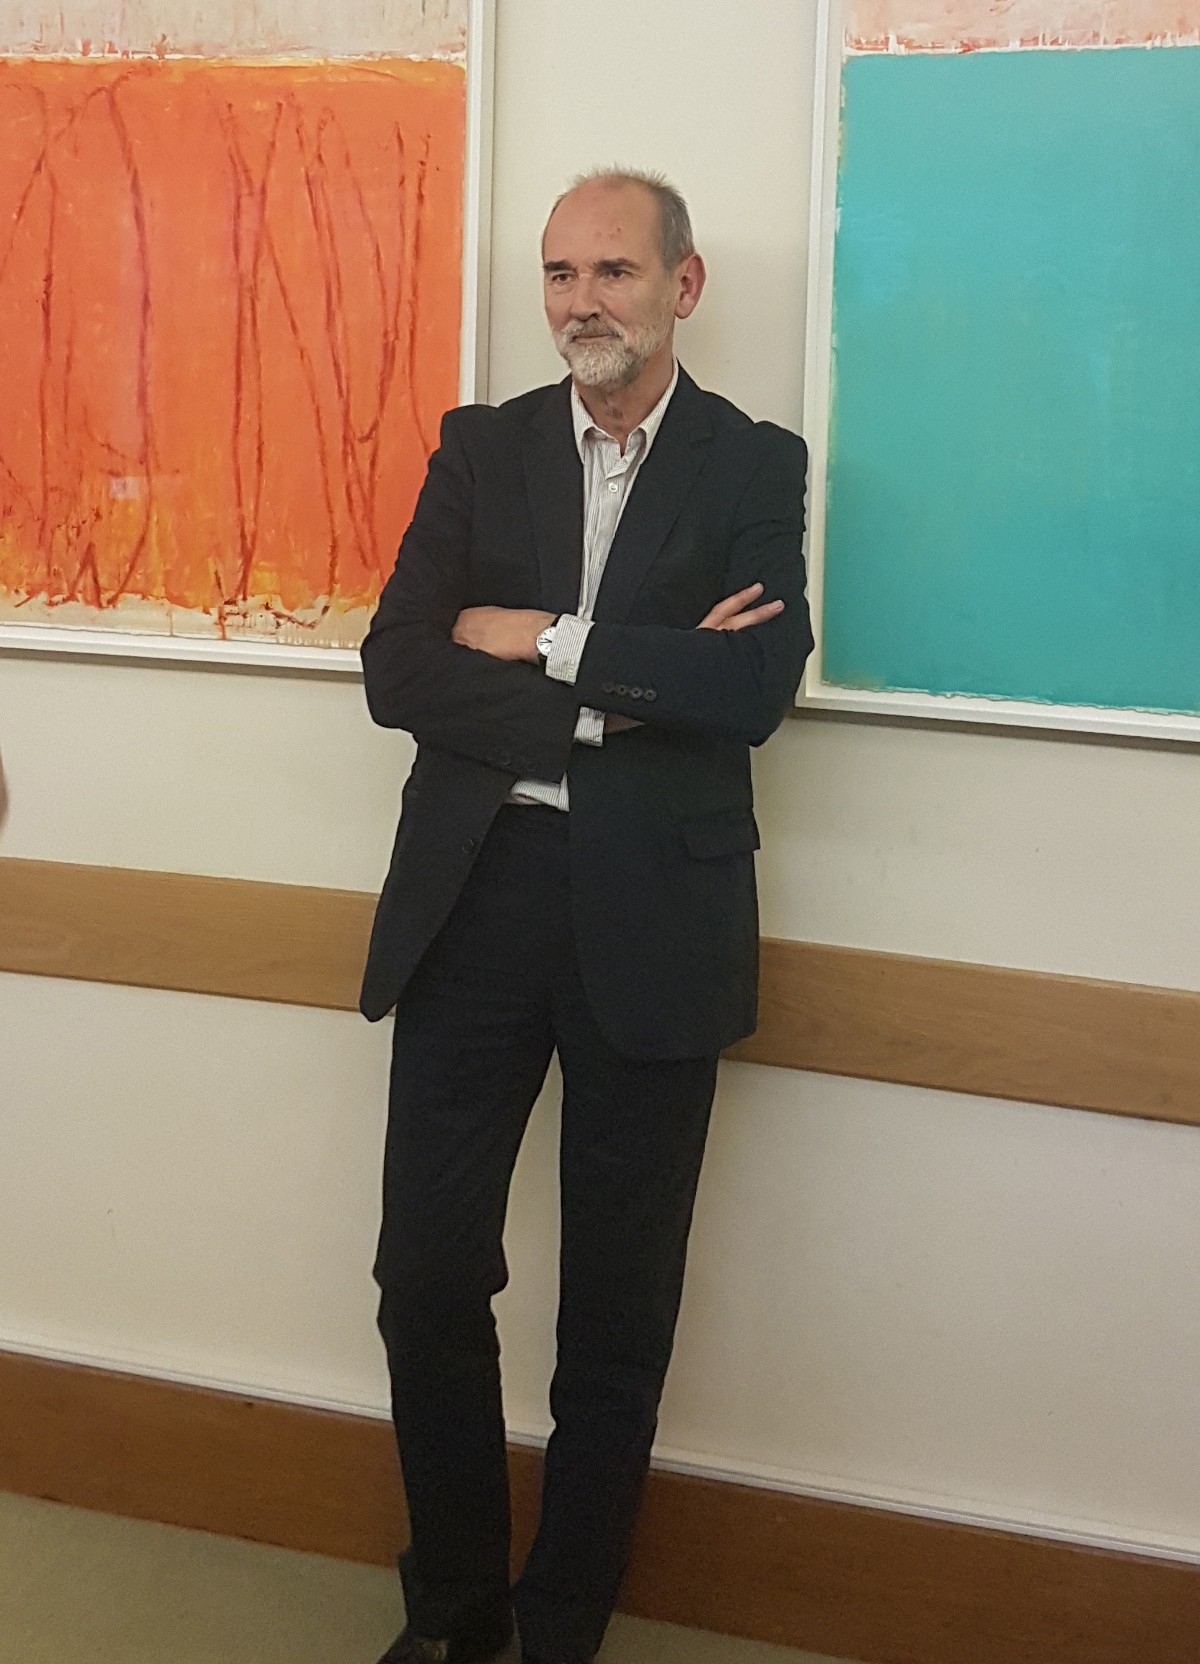 Christopher Le Brun opening draws a crowd at Wolfson | Wolfson